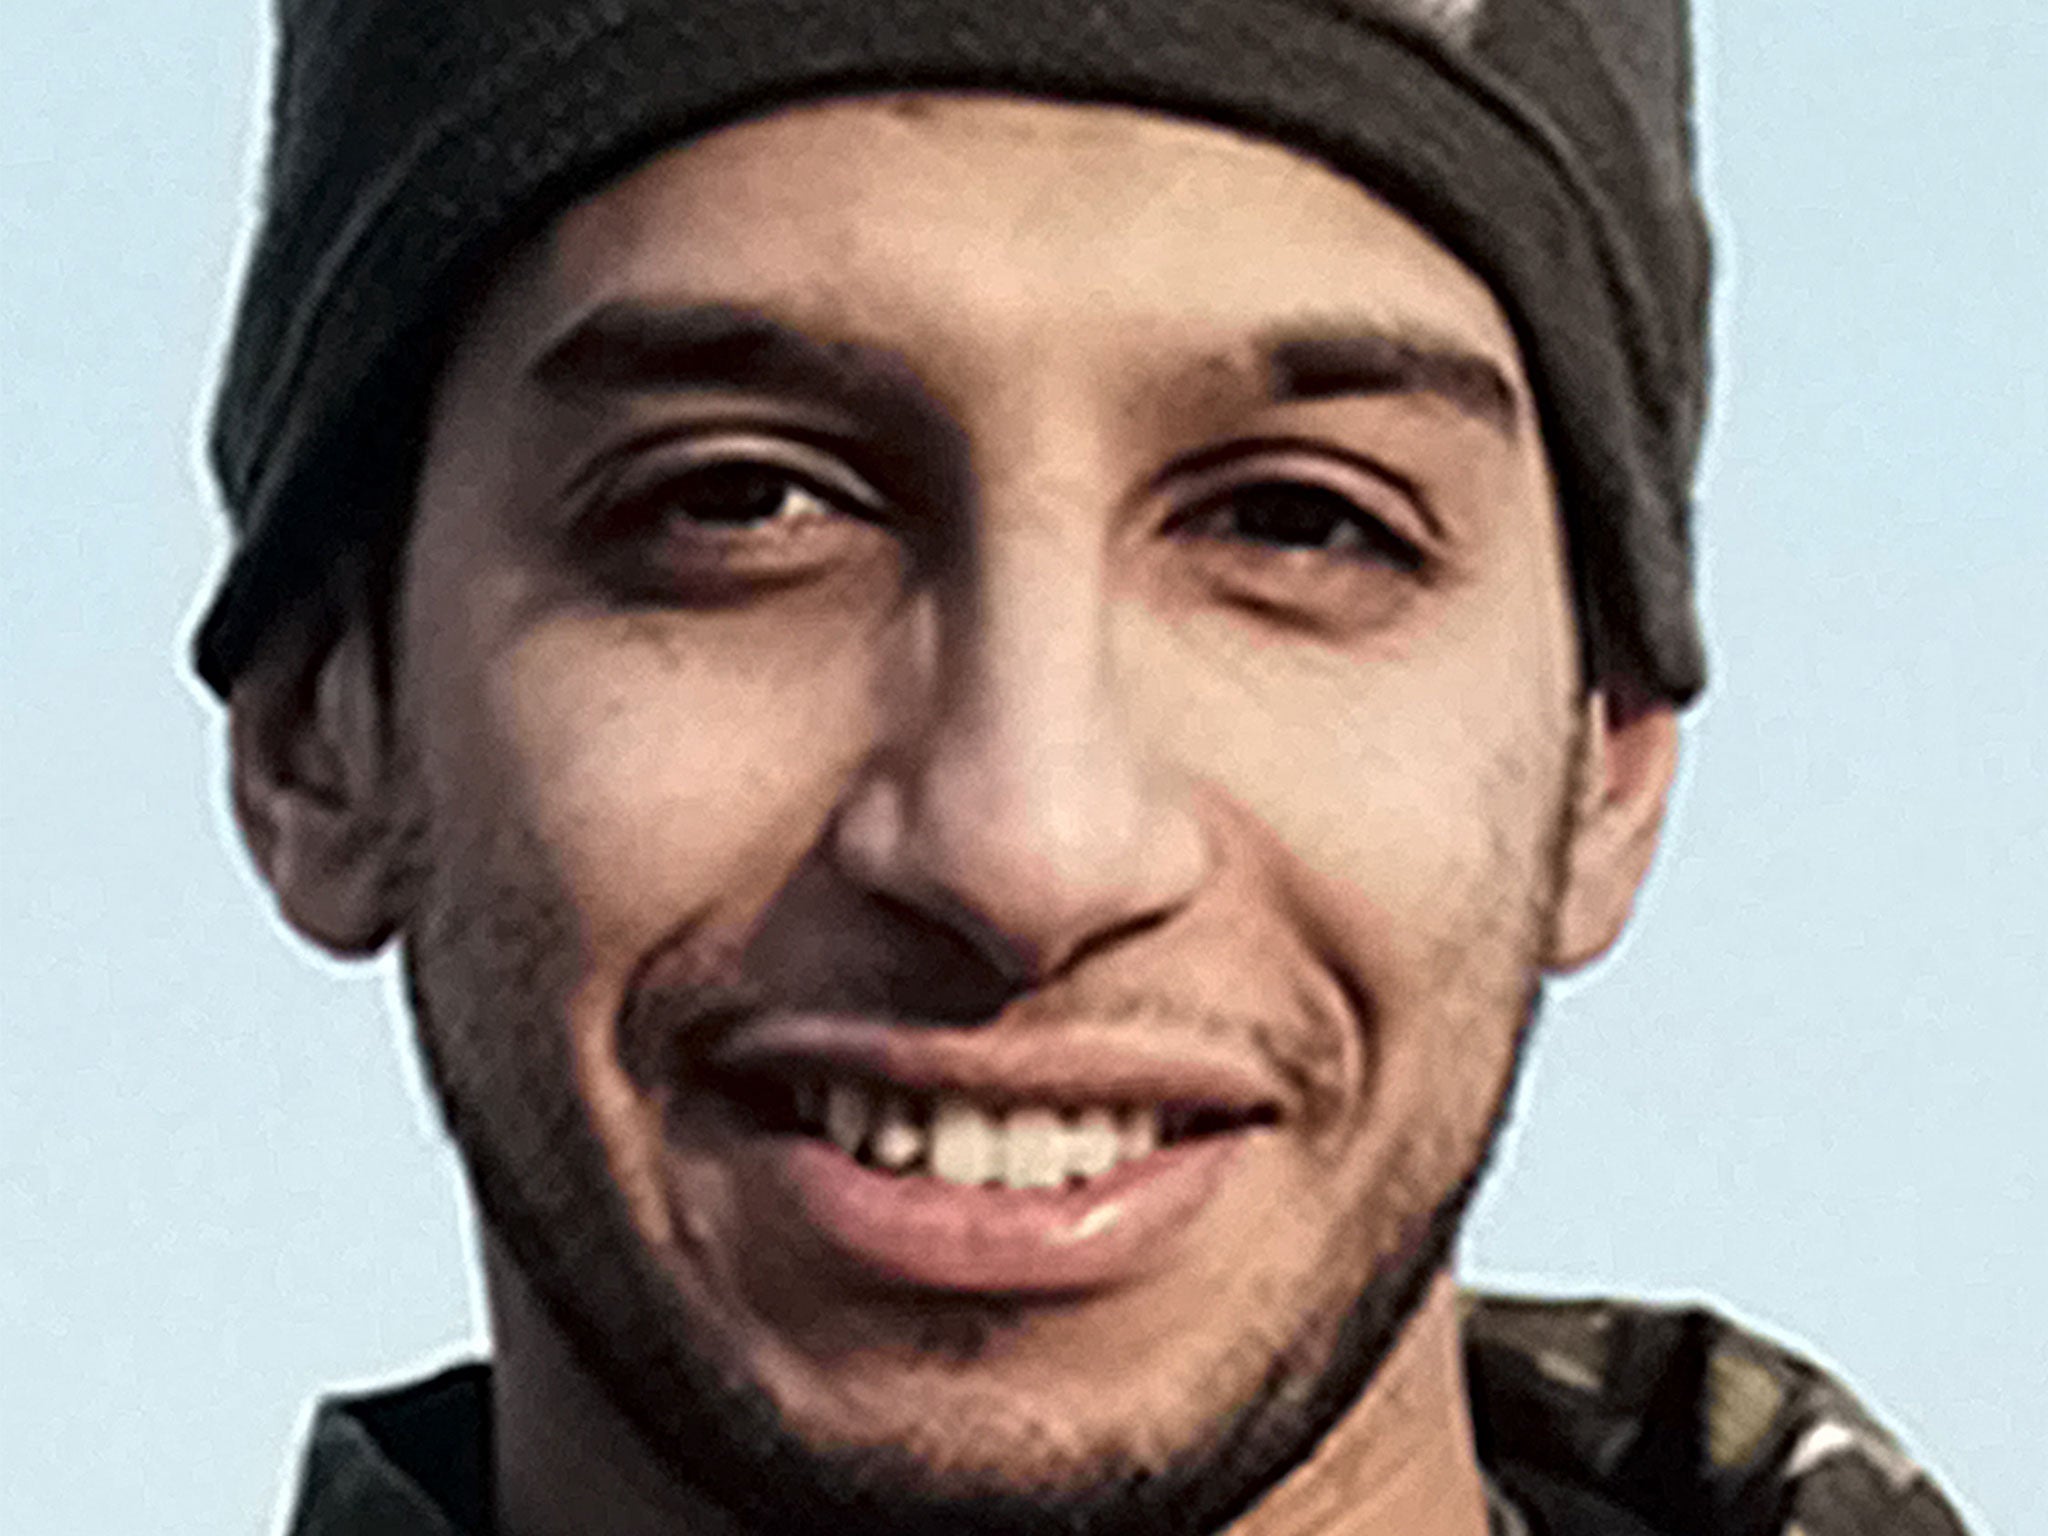 Abdelhamid Abaaoud, the so-called mastermind behind the Paris attacks